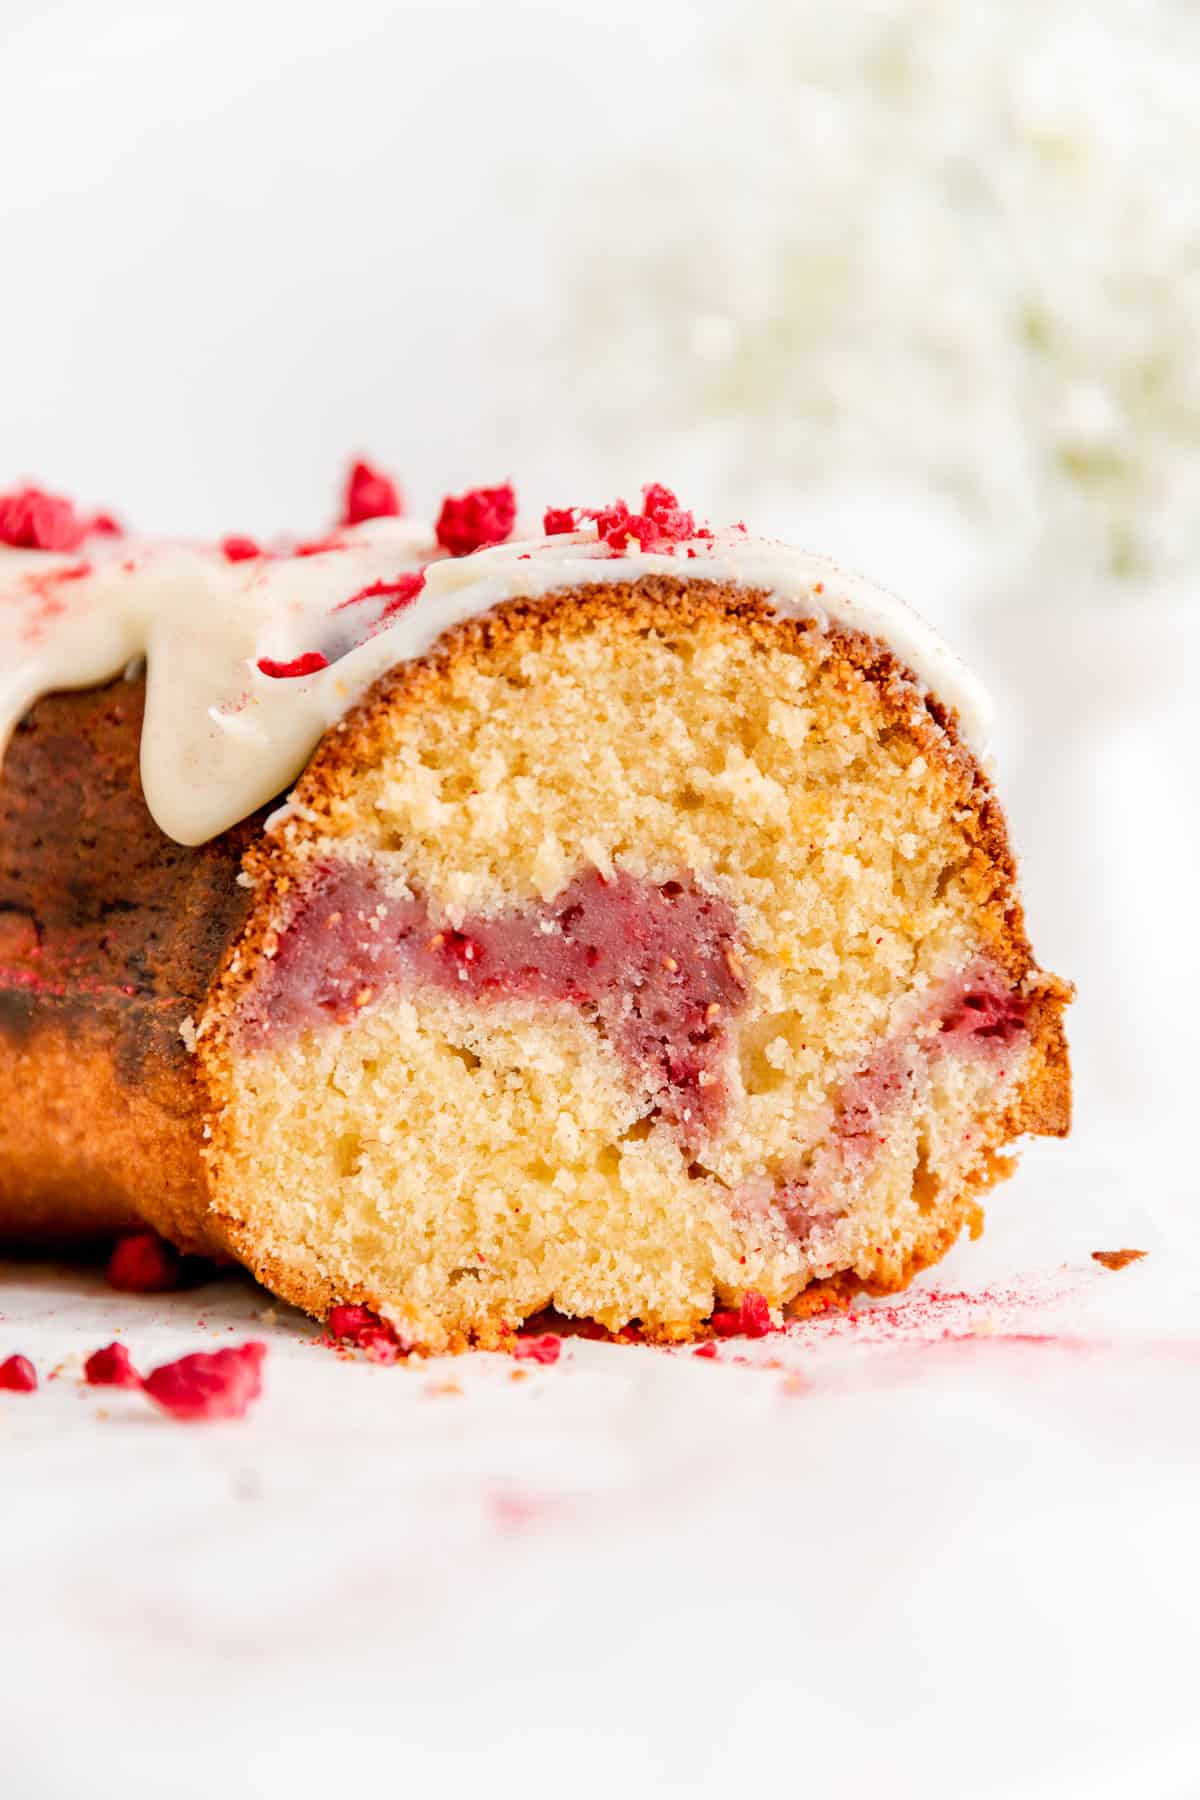 Close up of cross-section of sliced Bundt cake with white chocolate sauce showing raspberry swirl.